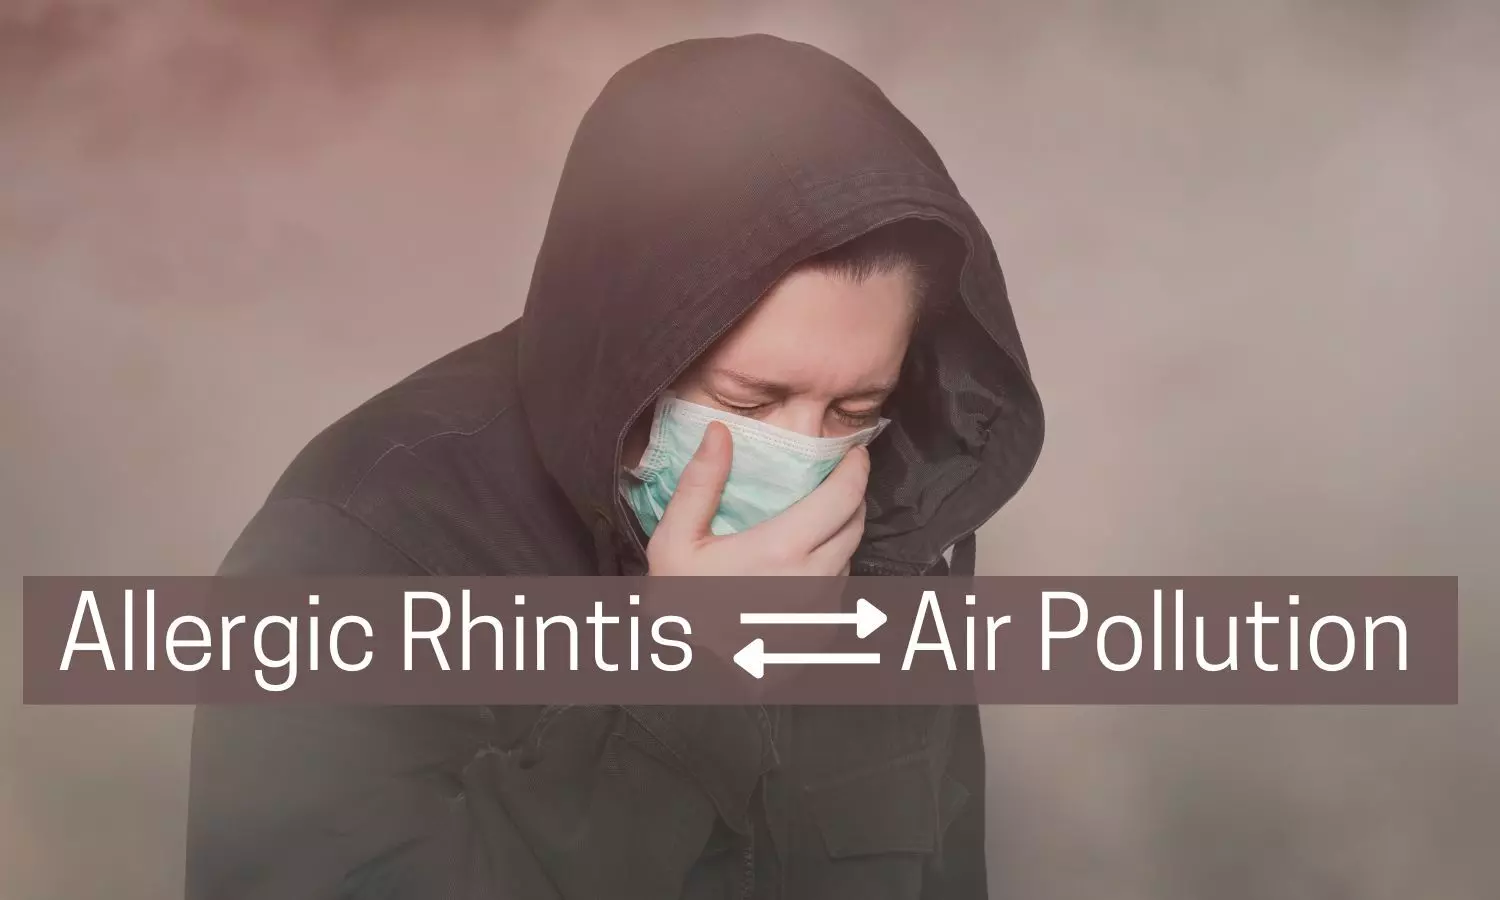 Air Pollution and Allergic Rhinitis-Interactions, Effects, and Intervention Needs